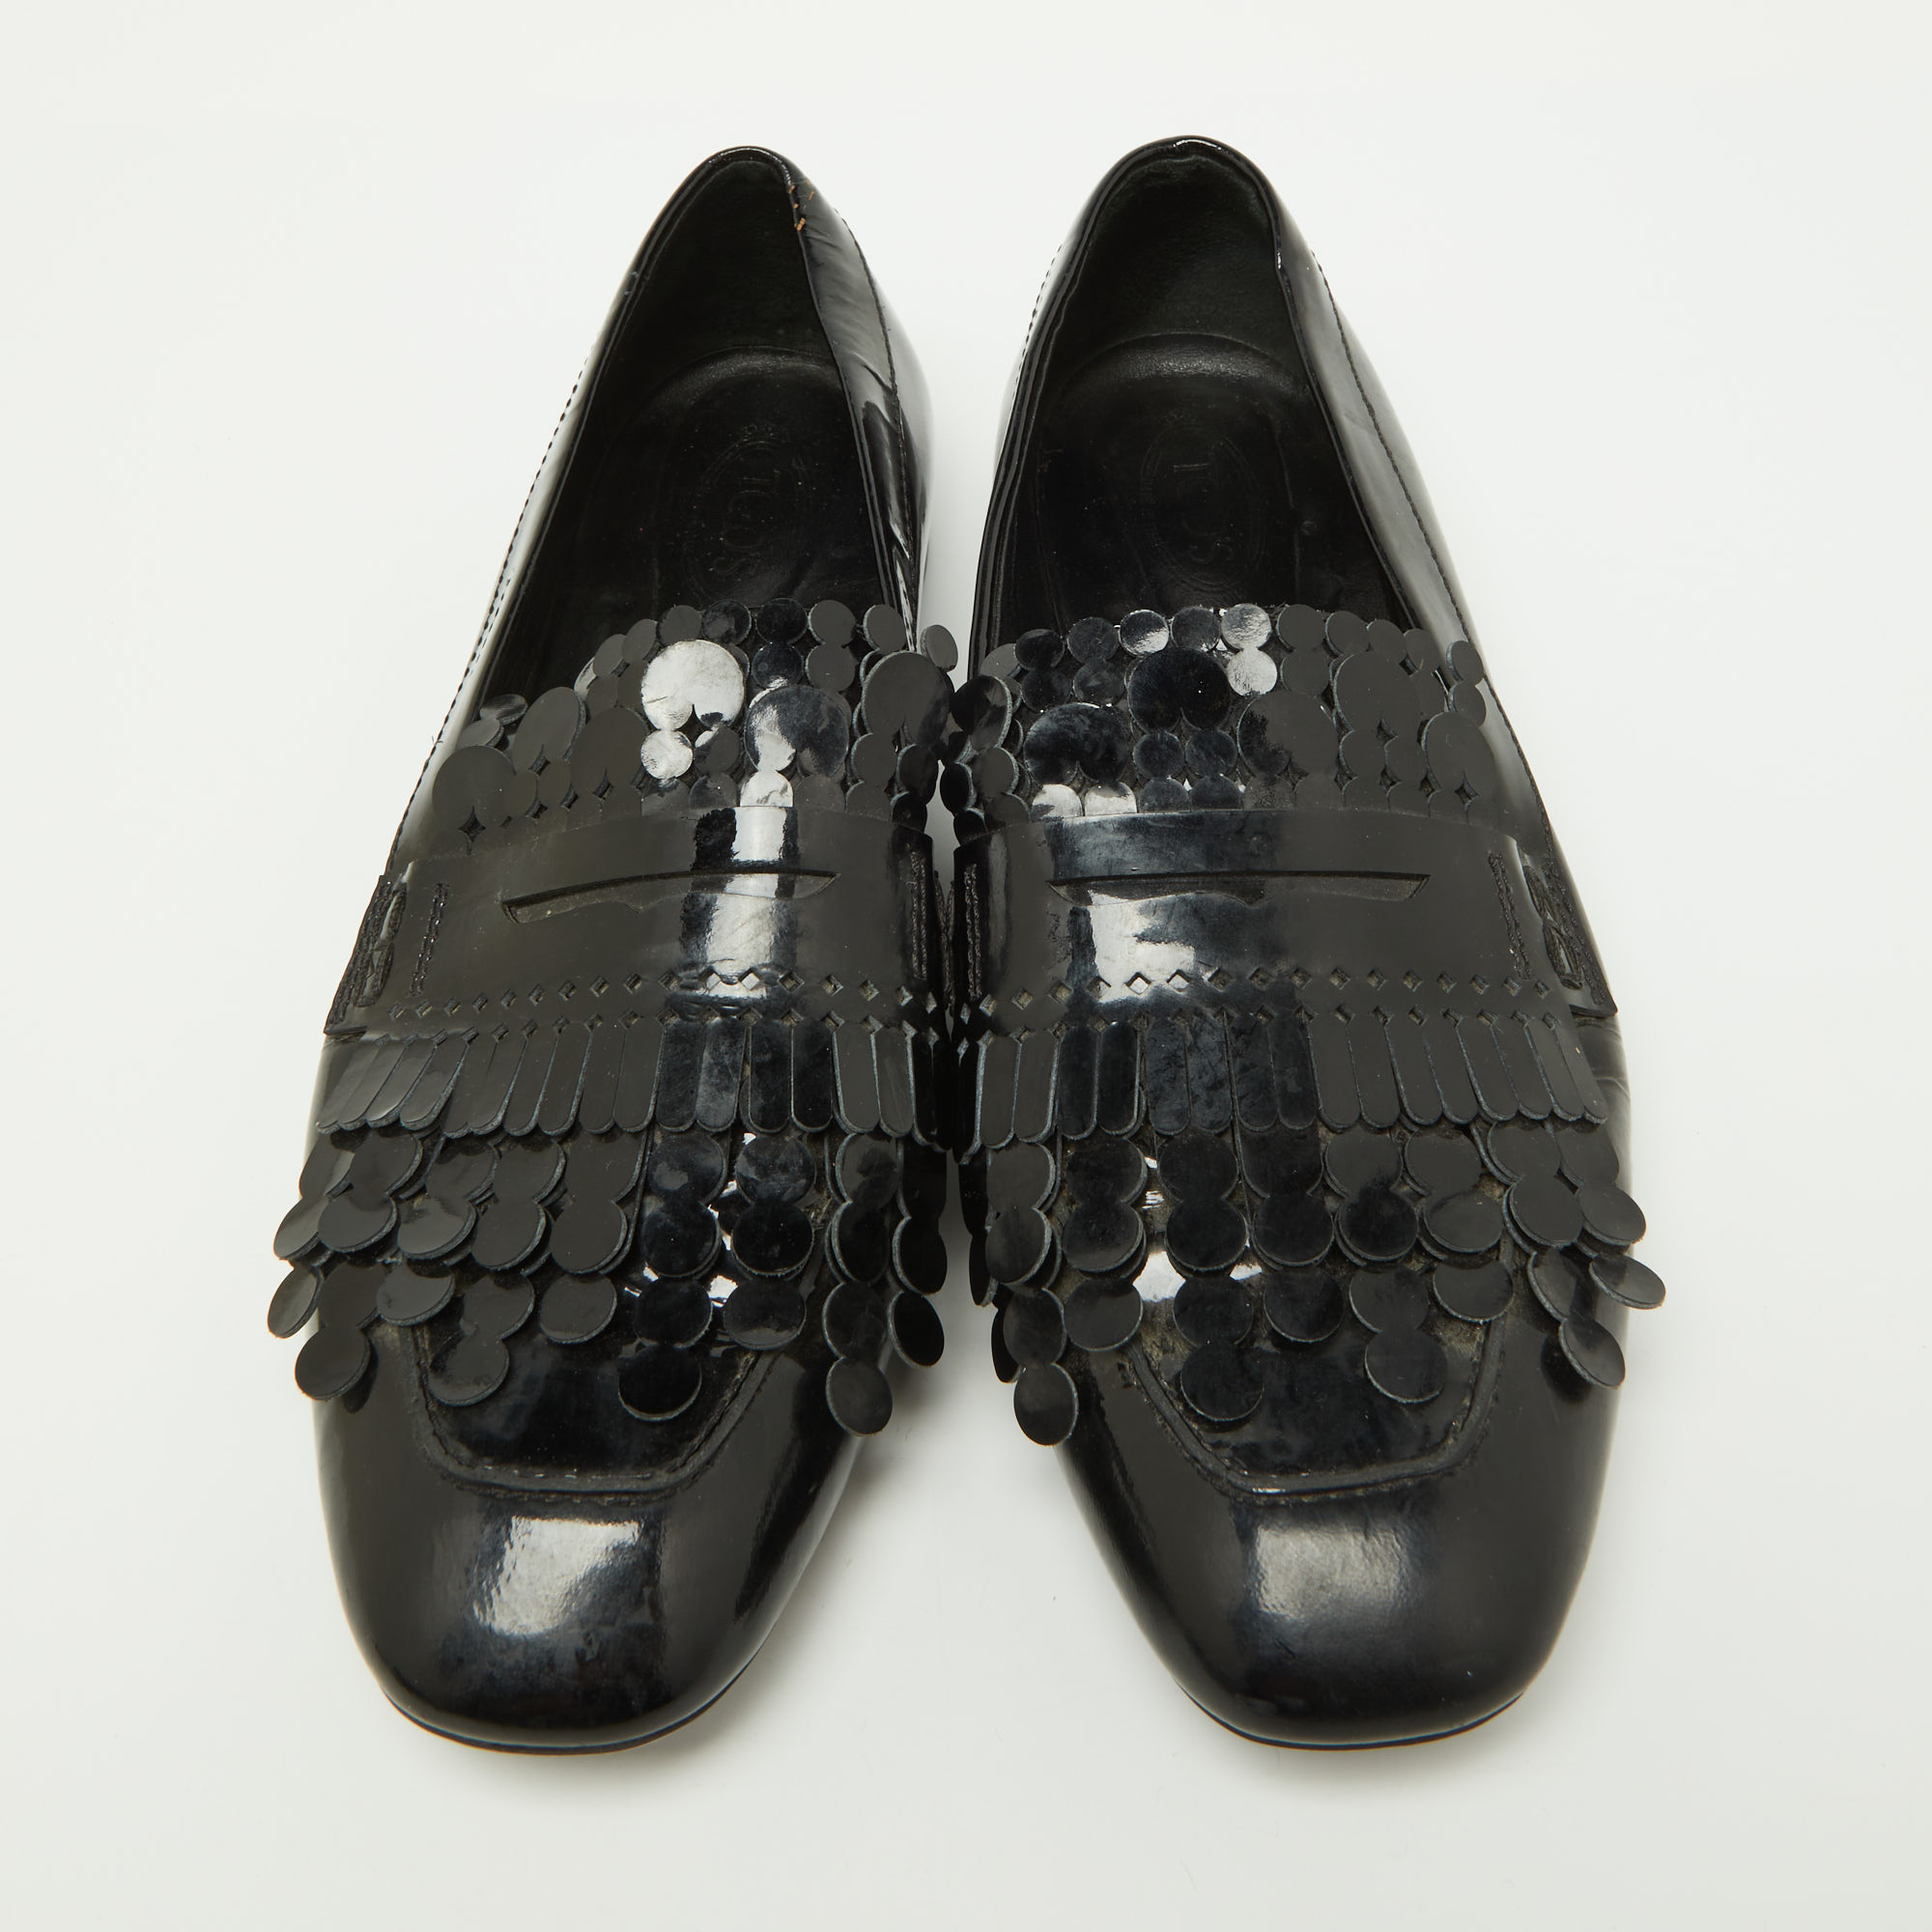 Tod's Black Patent Leather Laser Cut Fringe Loafers Size 38.5